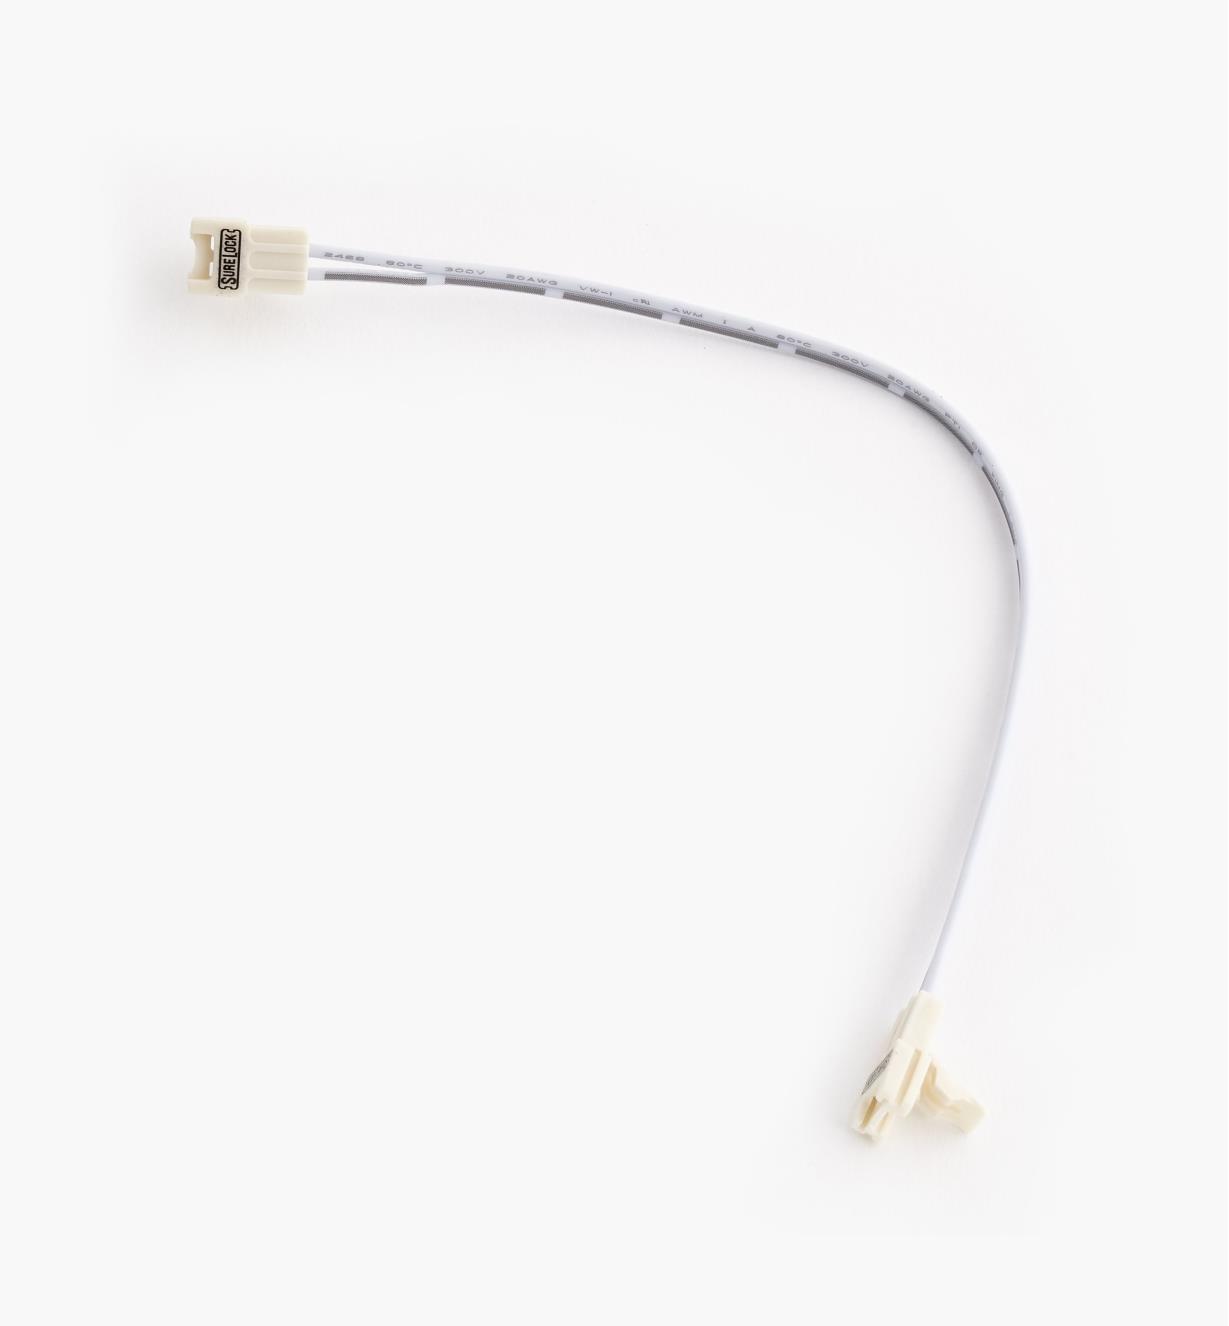 00U4141 - Wire Lead Connector